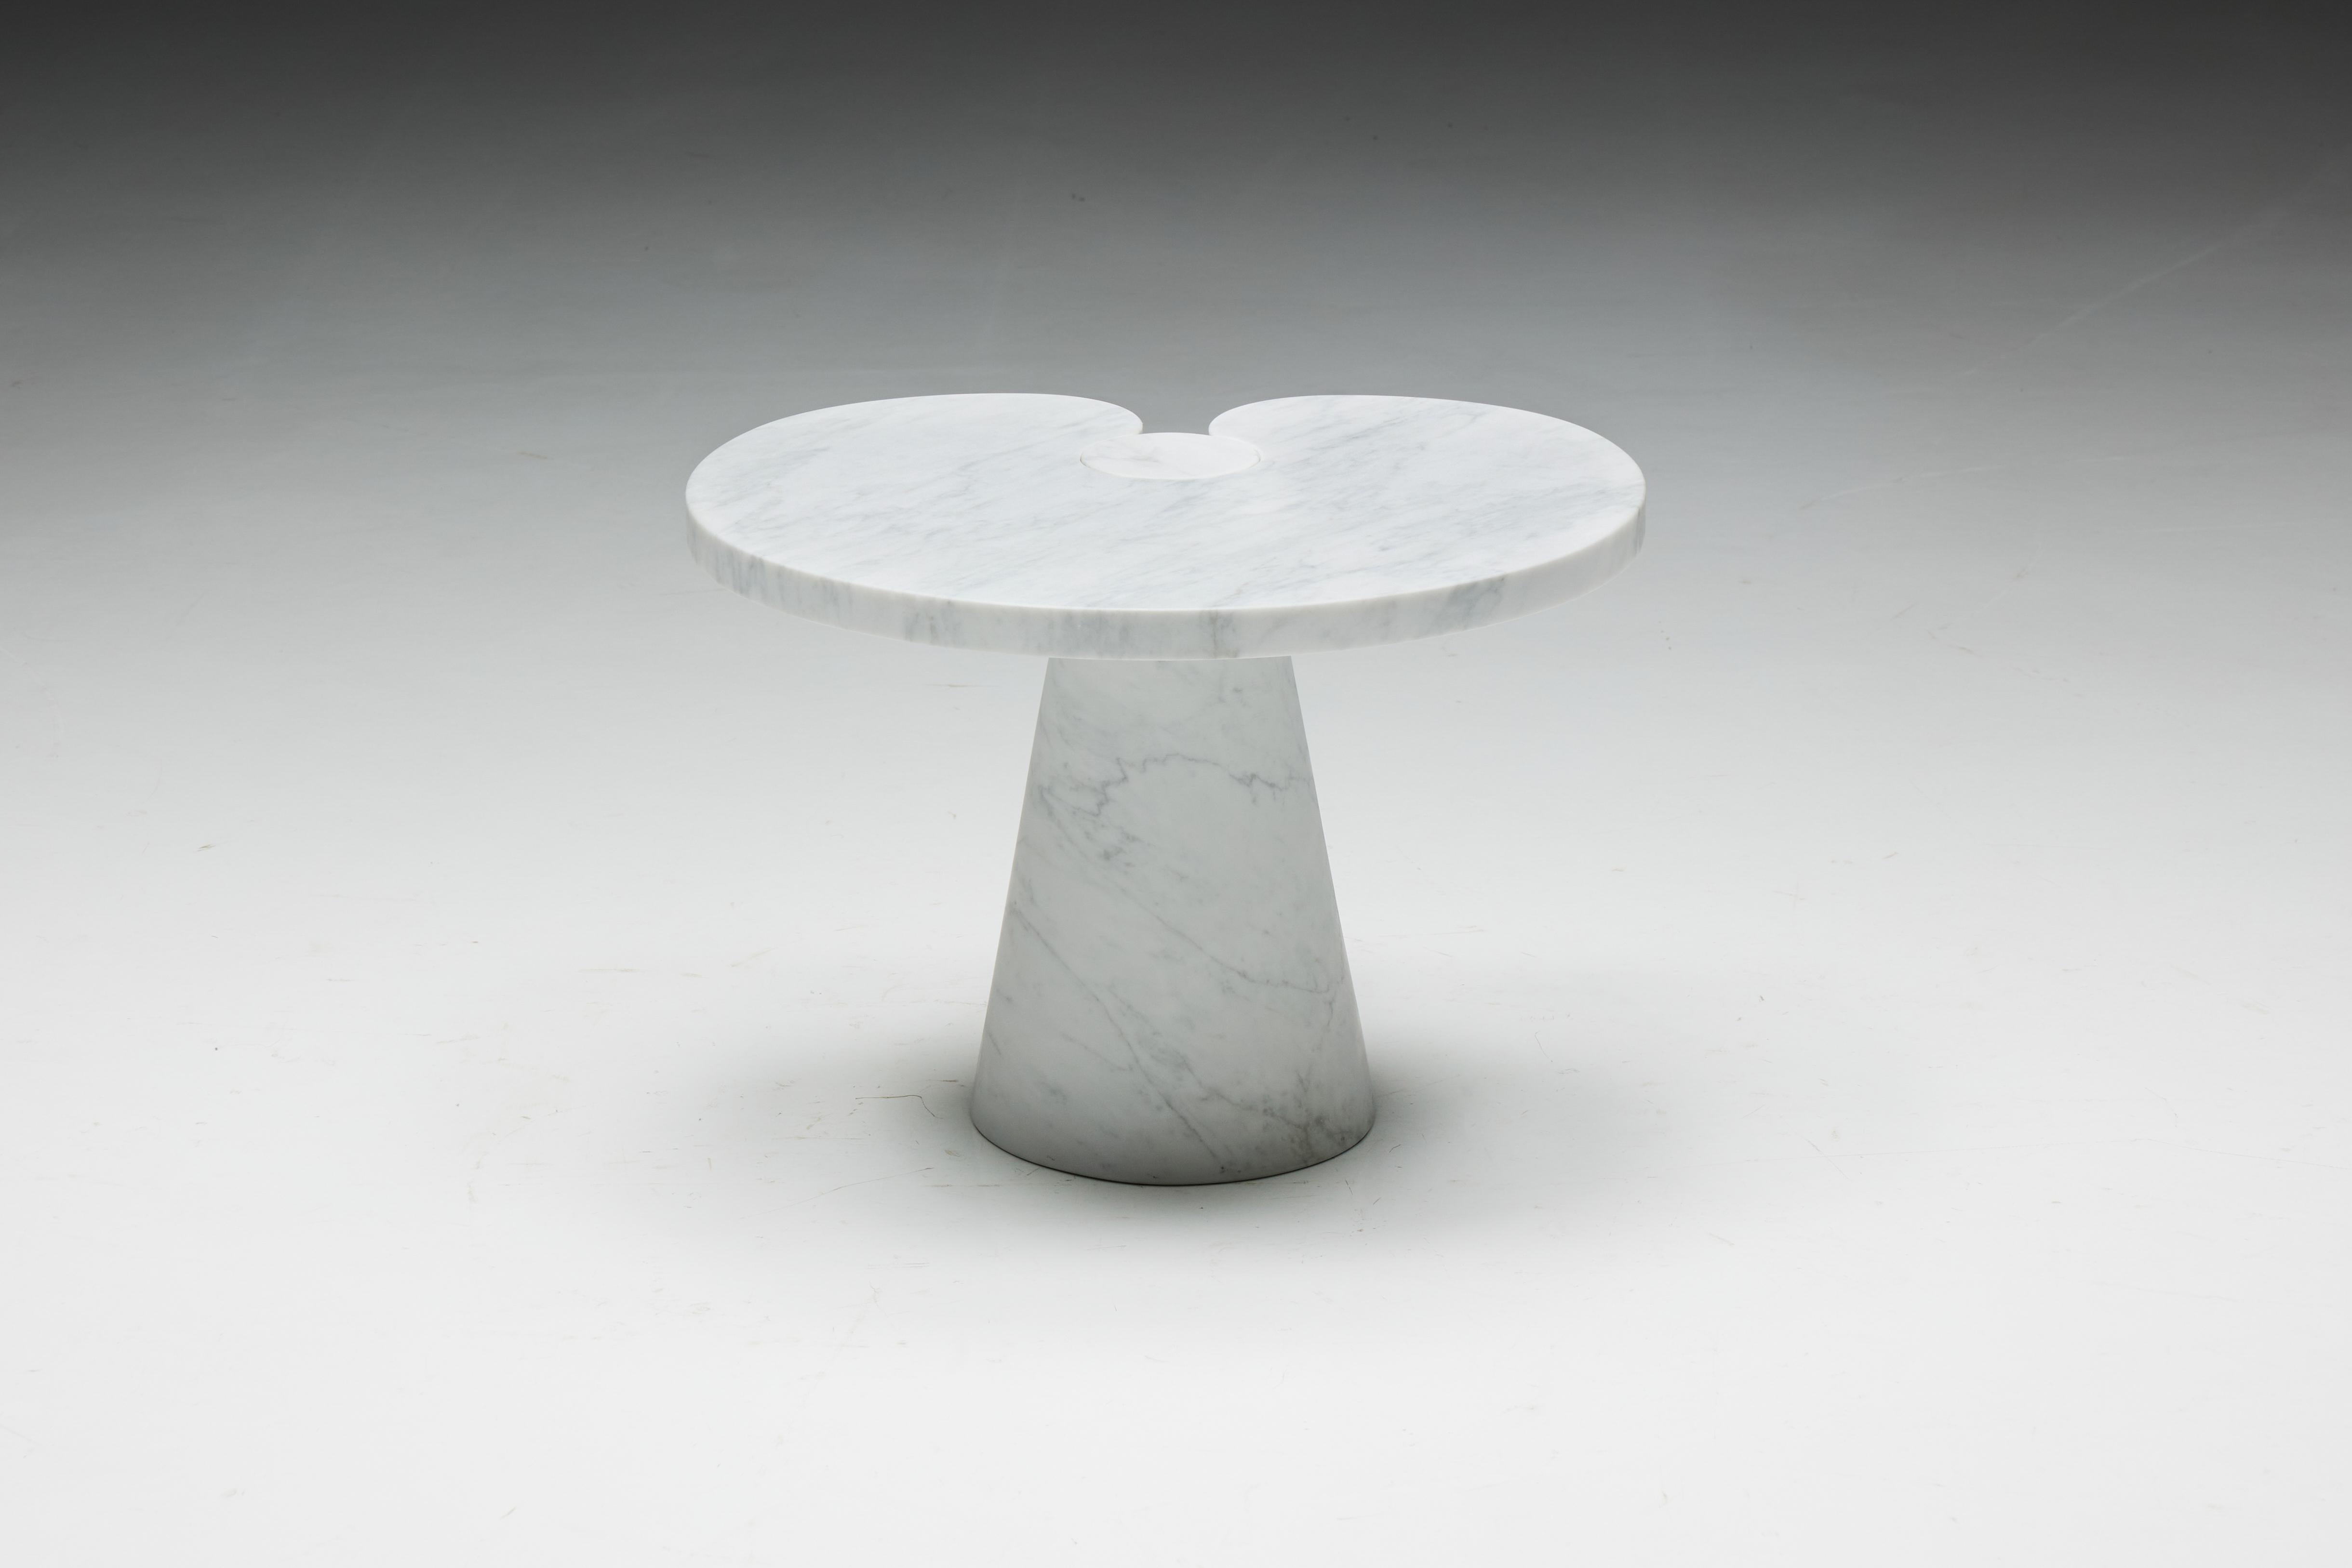 Carrara marble side Table by Angelo Mangiarotti, a masterful creation from the Eros series crafted for Skipper in Italy in the 1970s. Made entirely of solid white Carrara marble, its elegant design showcases beautiful veining throughout.

Angelo